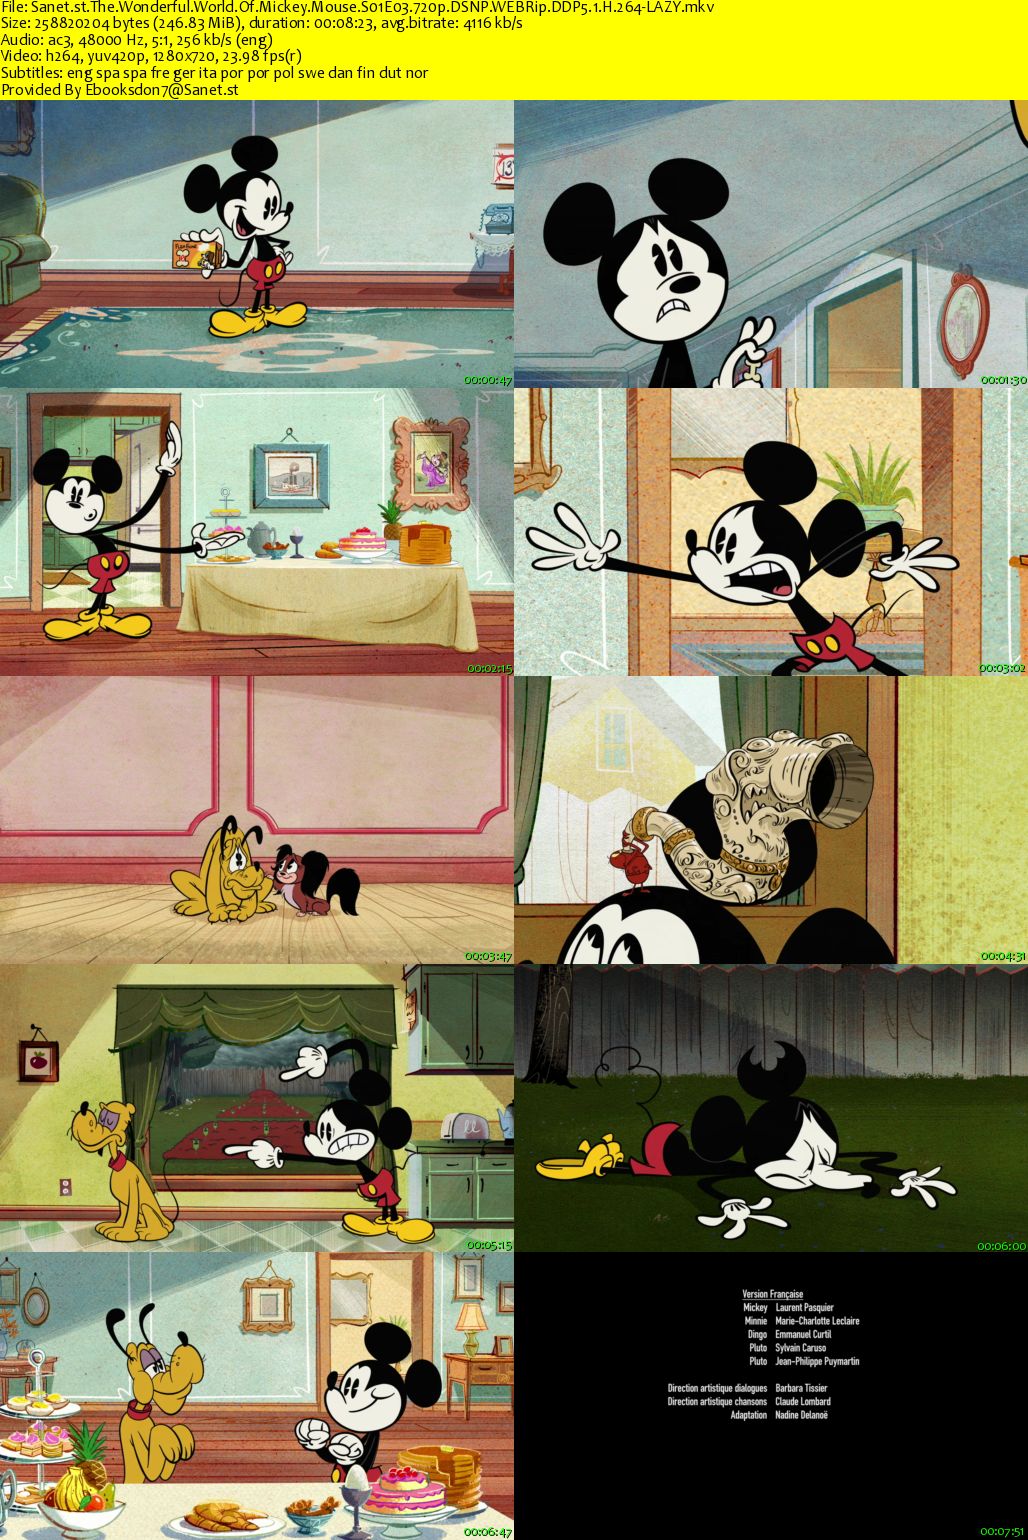 the wonderful world of mickey mouse download free